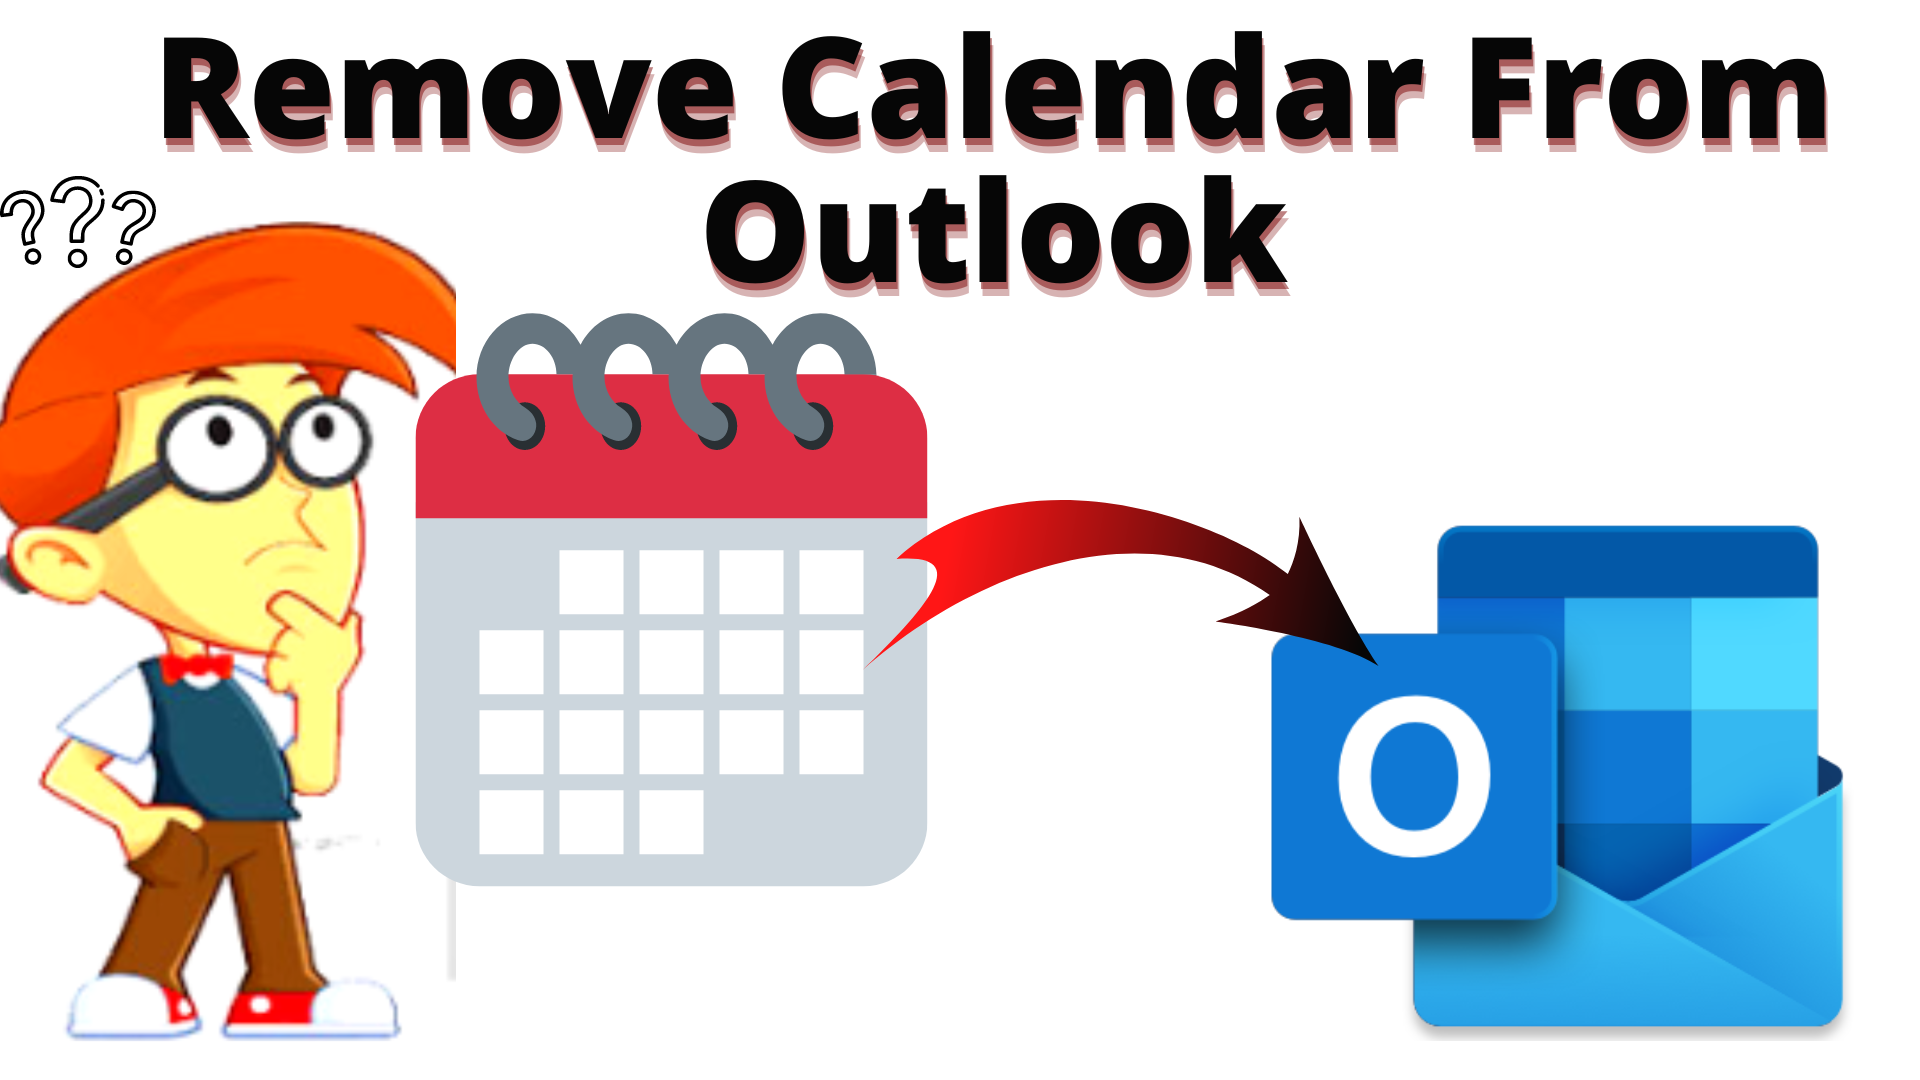 A Complete Guidelines to Remove Calendar From Outlook